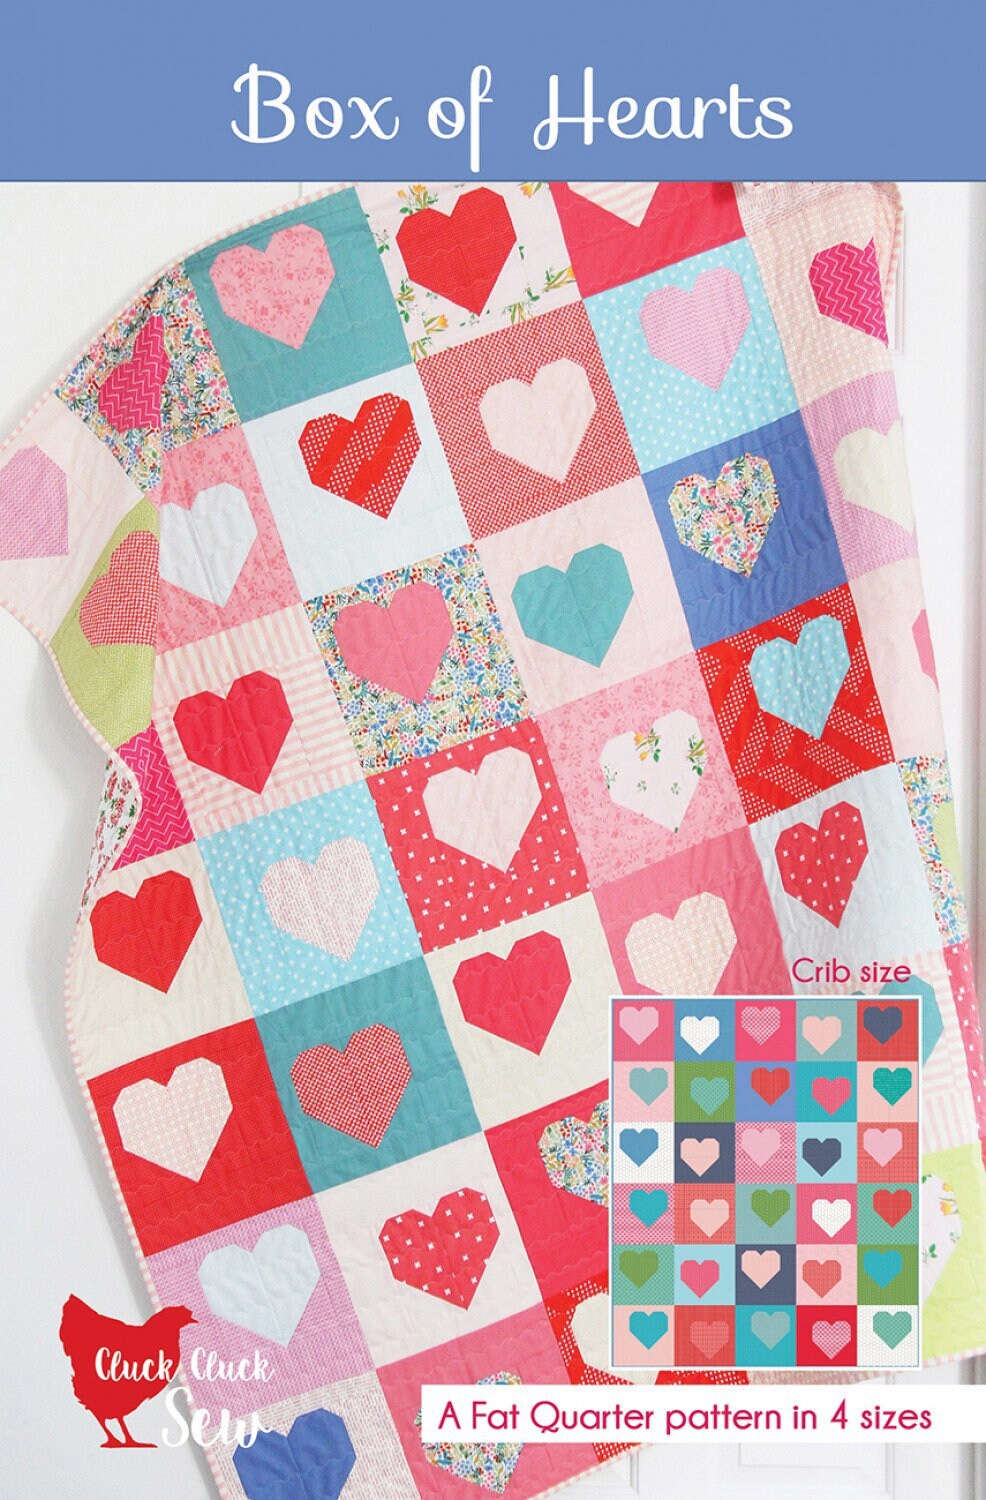 Box of Hearts - Cluck Cluck Sew - Allison Harris - Heart Quilt Pattern - Valentines Day Quilt Pattern - Fat Quarter Friendly